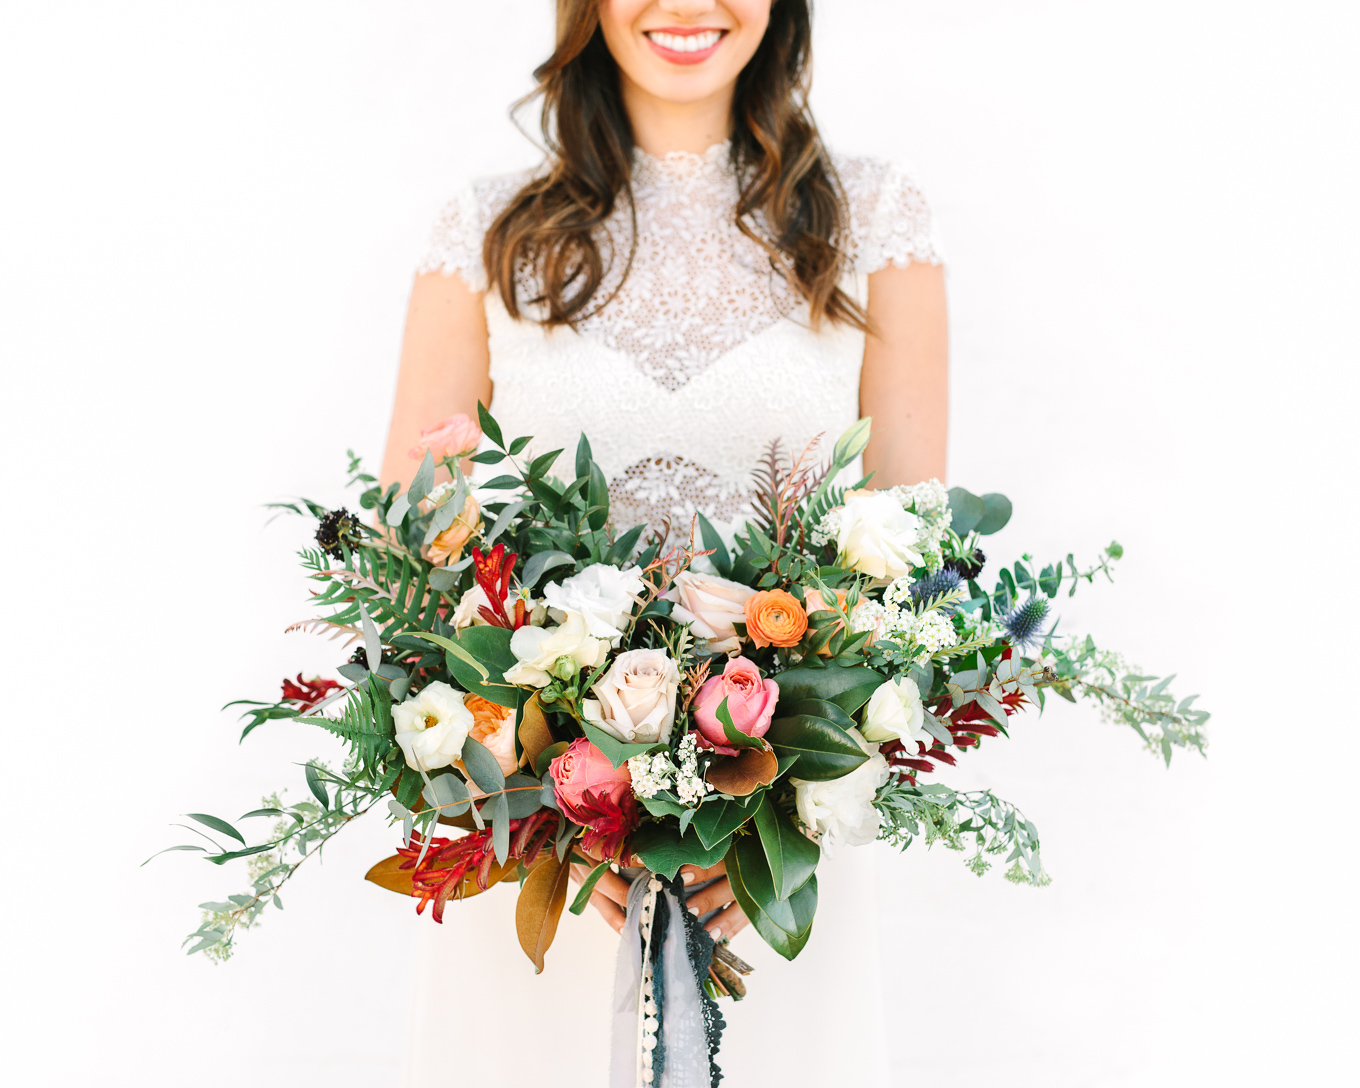 Organic and lush bouquet by Foxtail Florals | Beautiful bridal bouquet inspiration and advice | Colorful and elevated wedding photography for fun-loving couples in Southern California | #weddingflowers #weddingbouquet #bridebouquet #bouquetideas #uniquebouquet   Source: Mary Costa Photography | Los Angeles